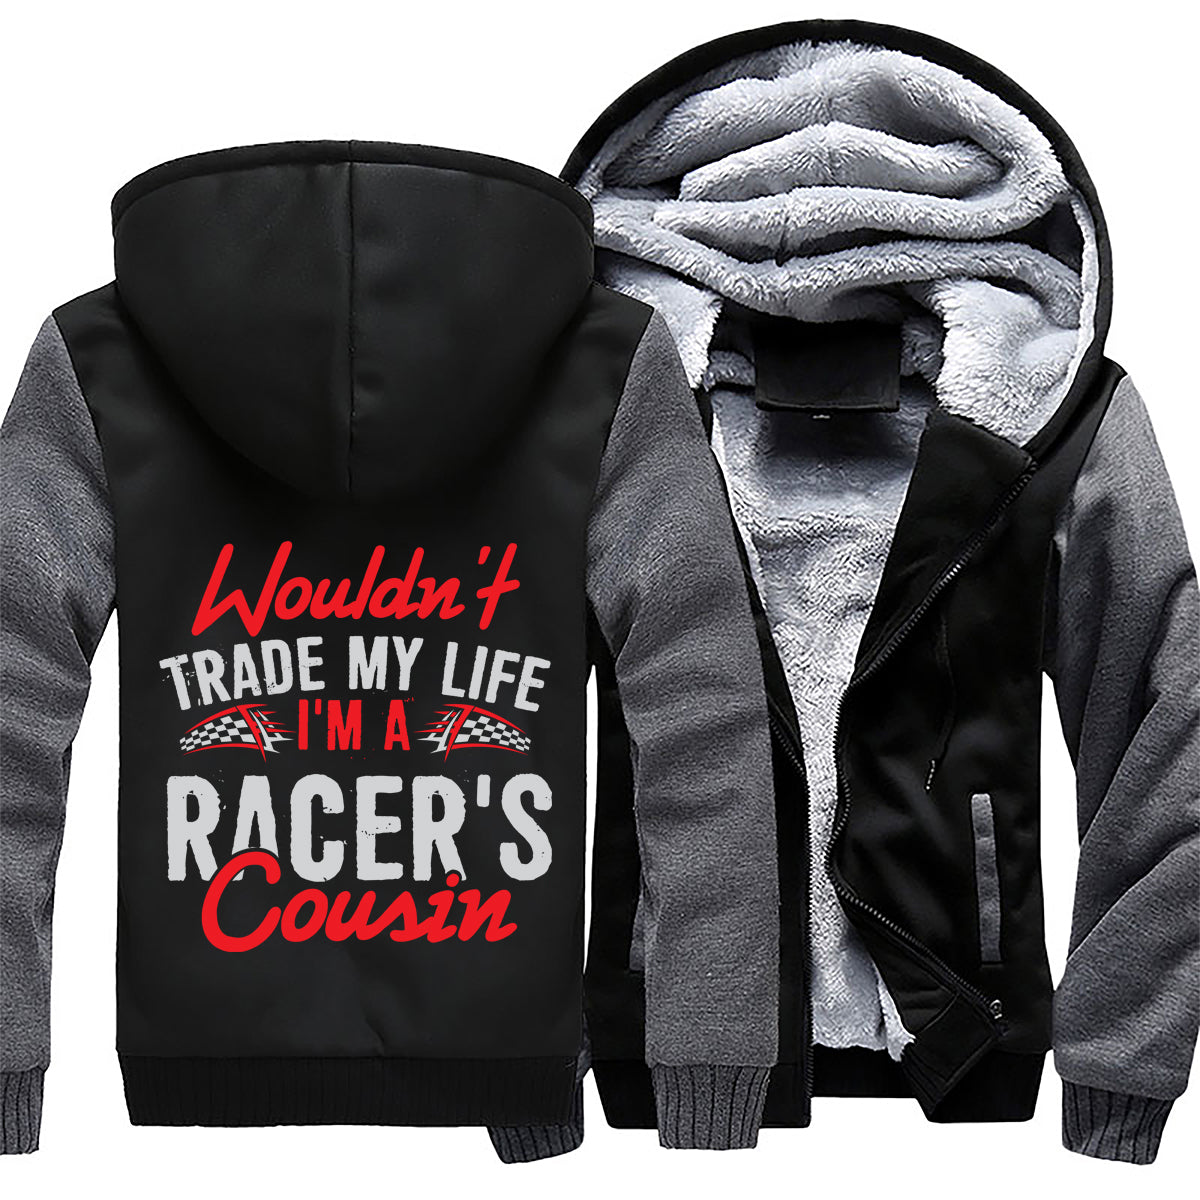 I'm A Racer's Cousin Jackets 